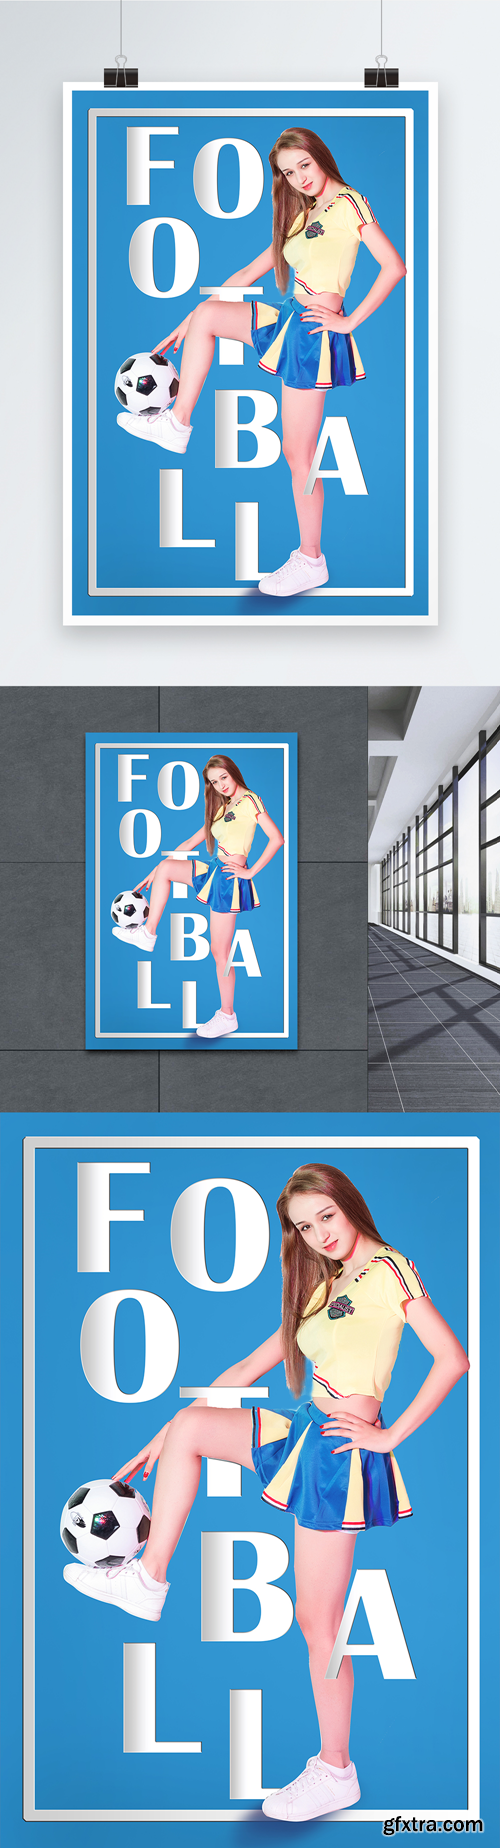 soccer baby sports poster